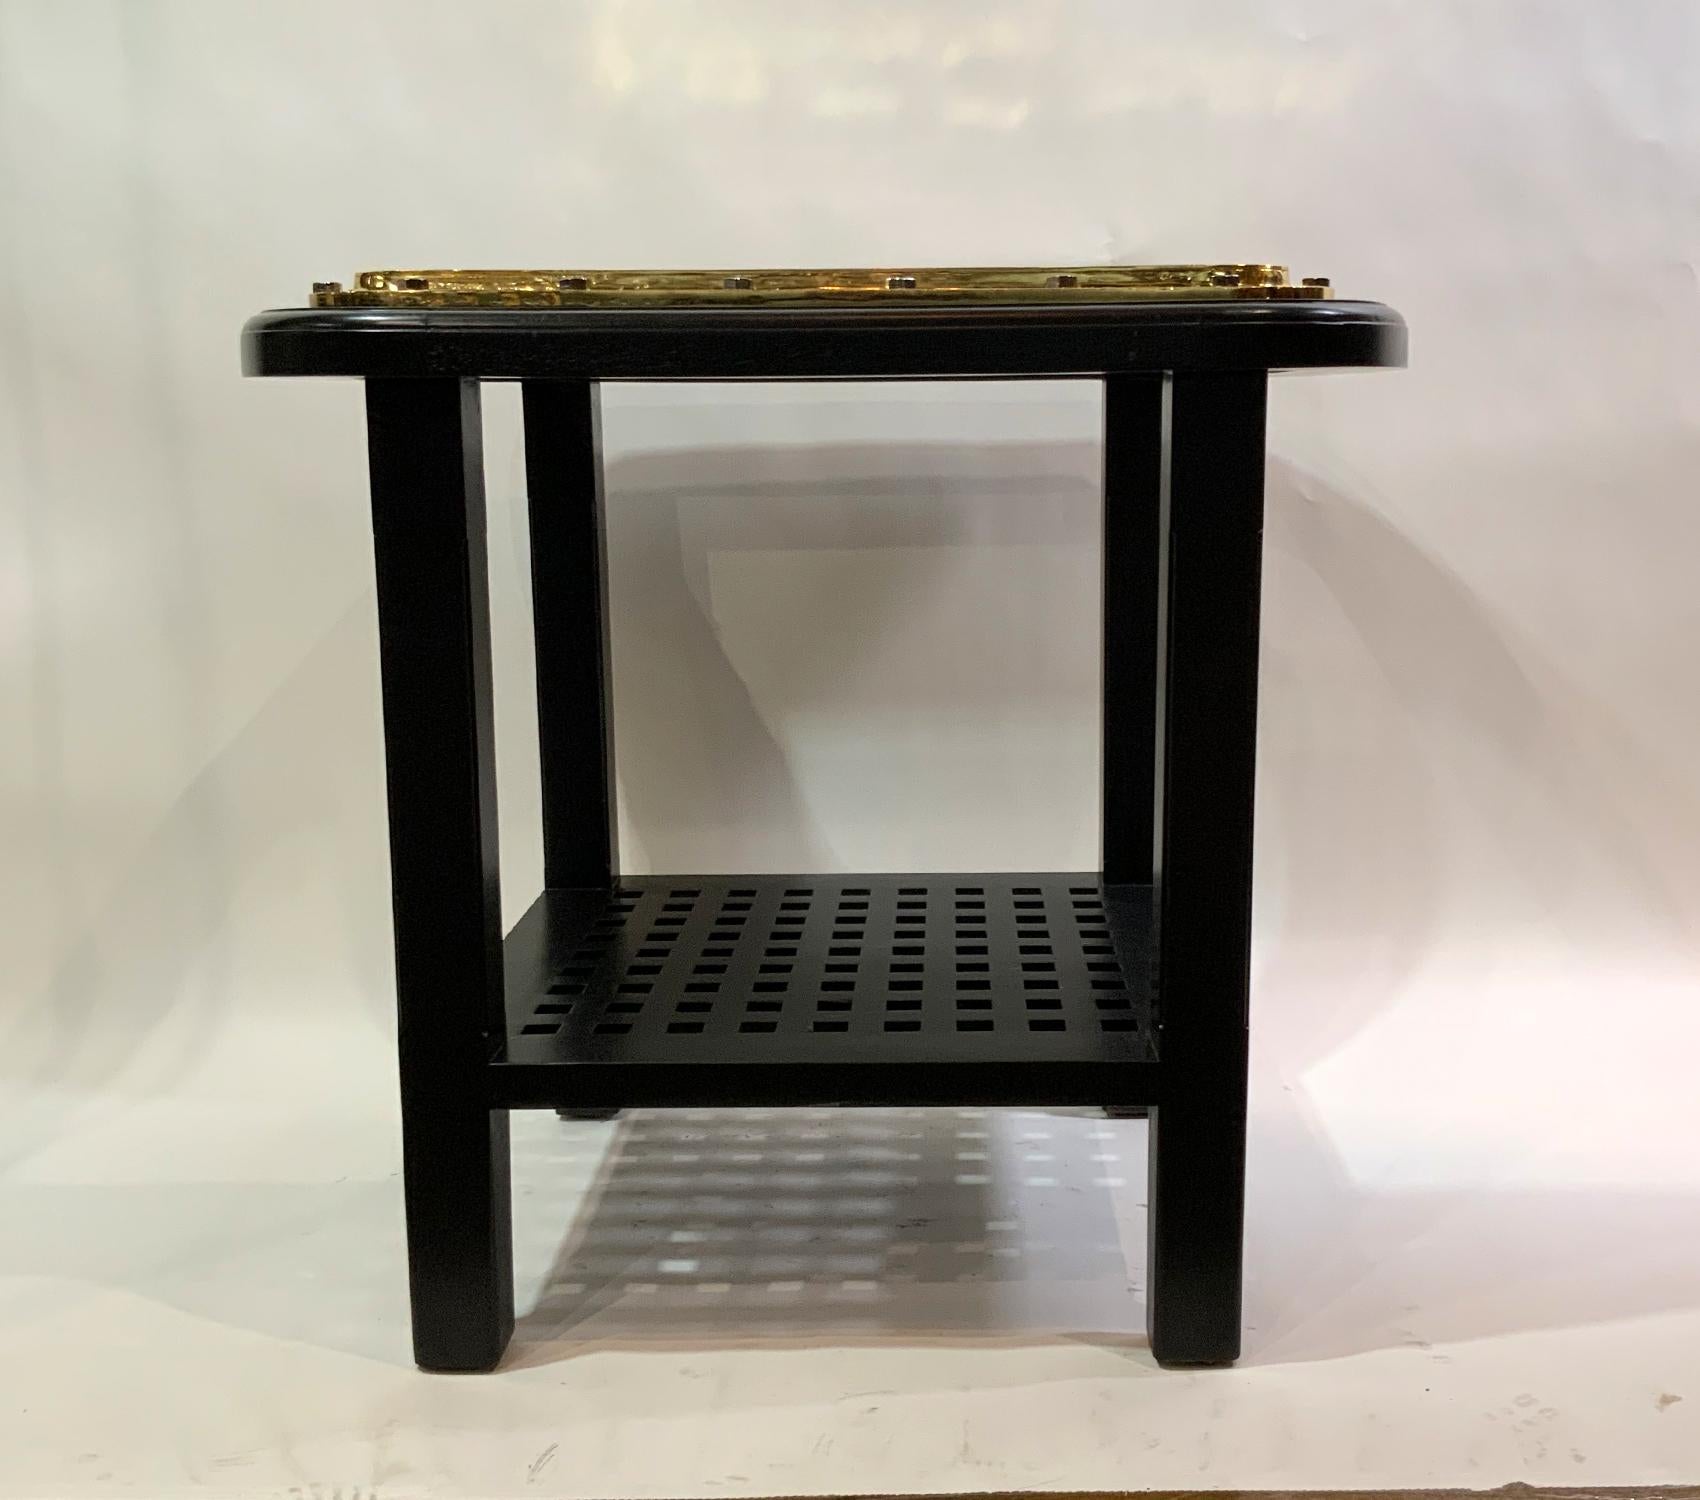 Solid brass ships porthole table. Meticulously polished and lacquered authentic ships porthole that has been fitted to a custom-built bistro table with a ships grating and four tapered legs.

Weight: 93 LBS
Overall Dimensions: 35” H x 31